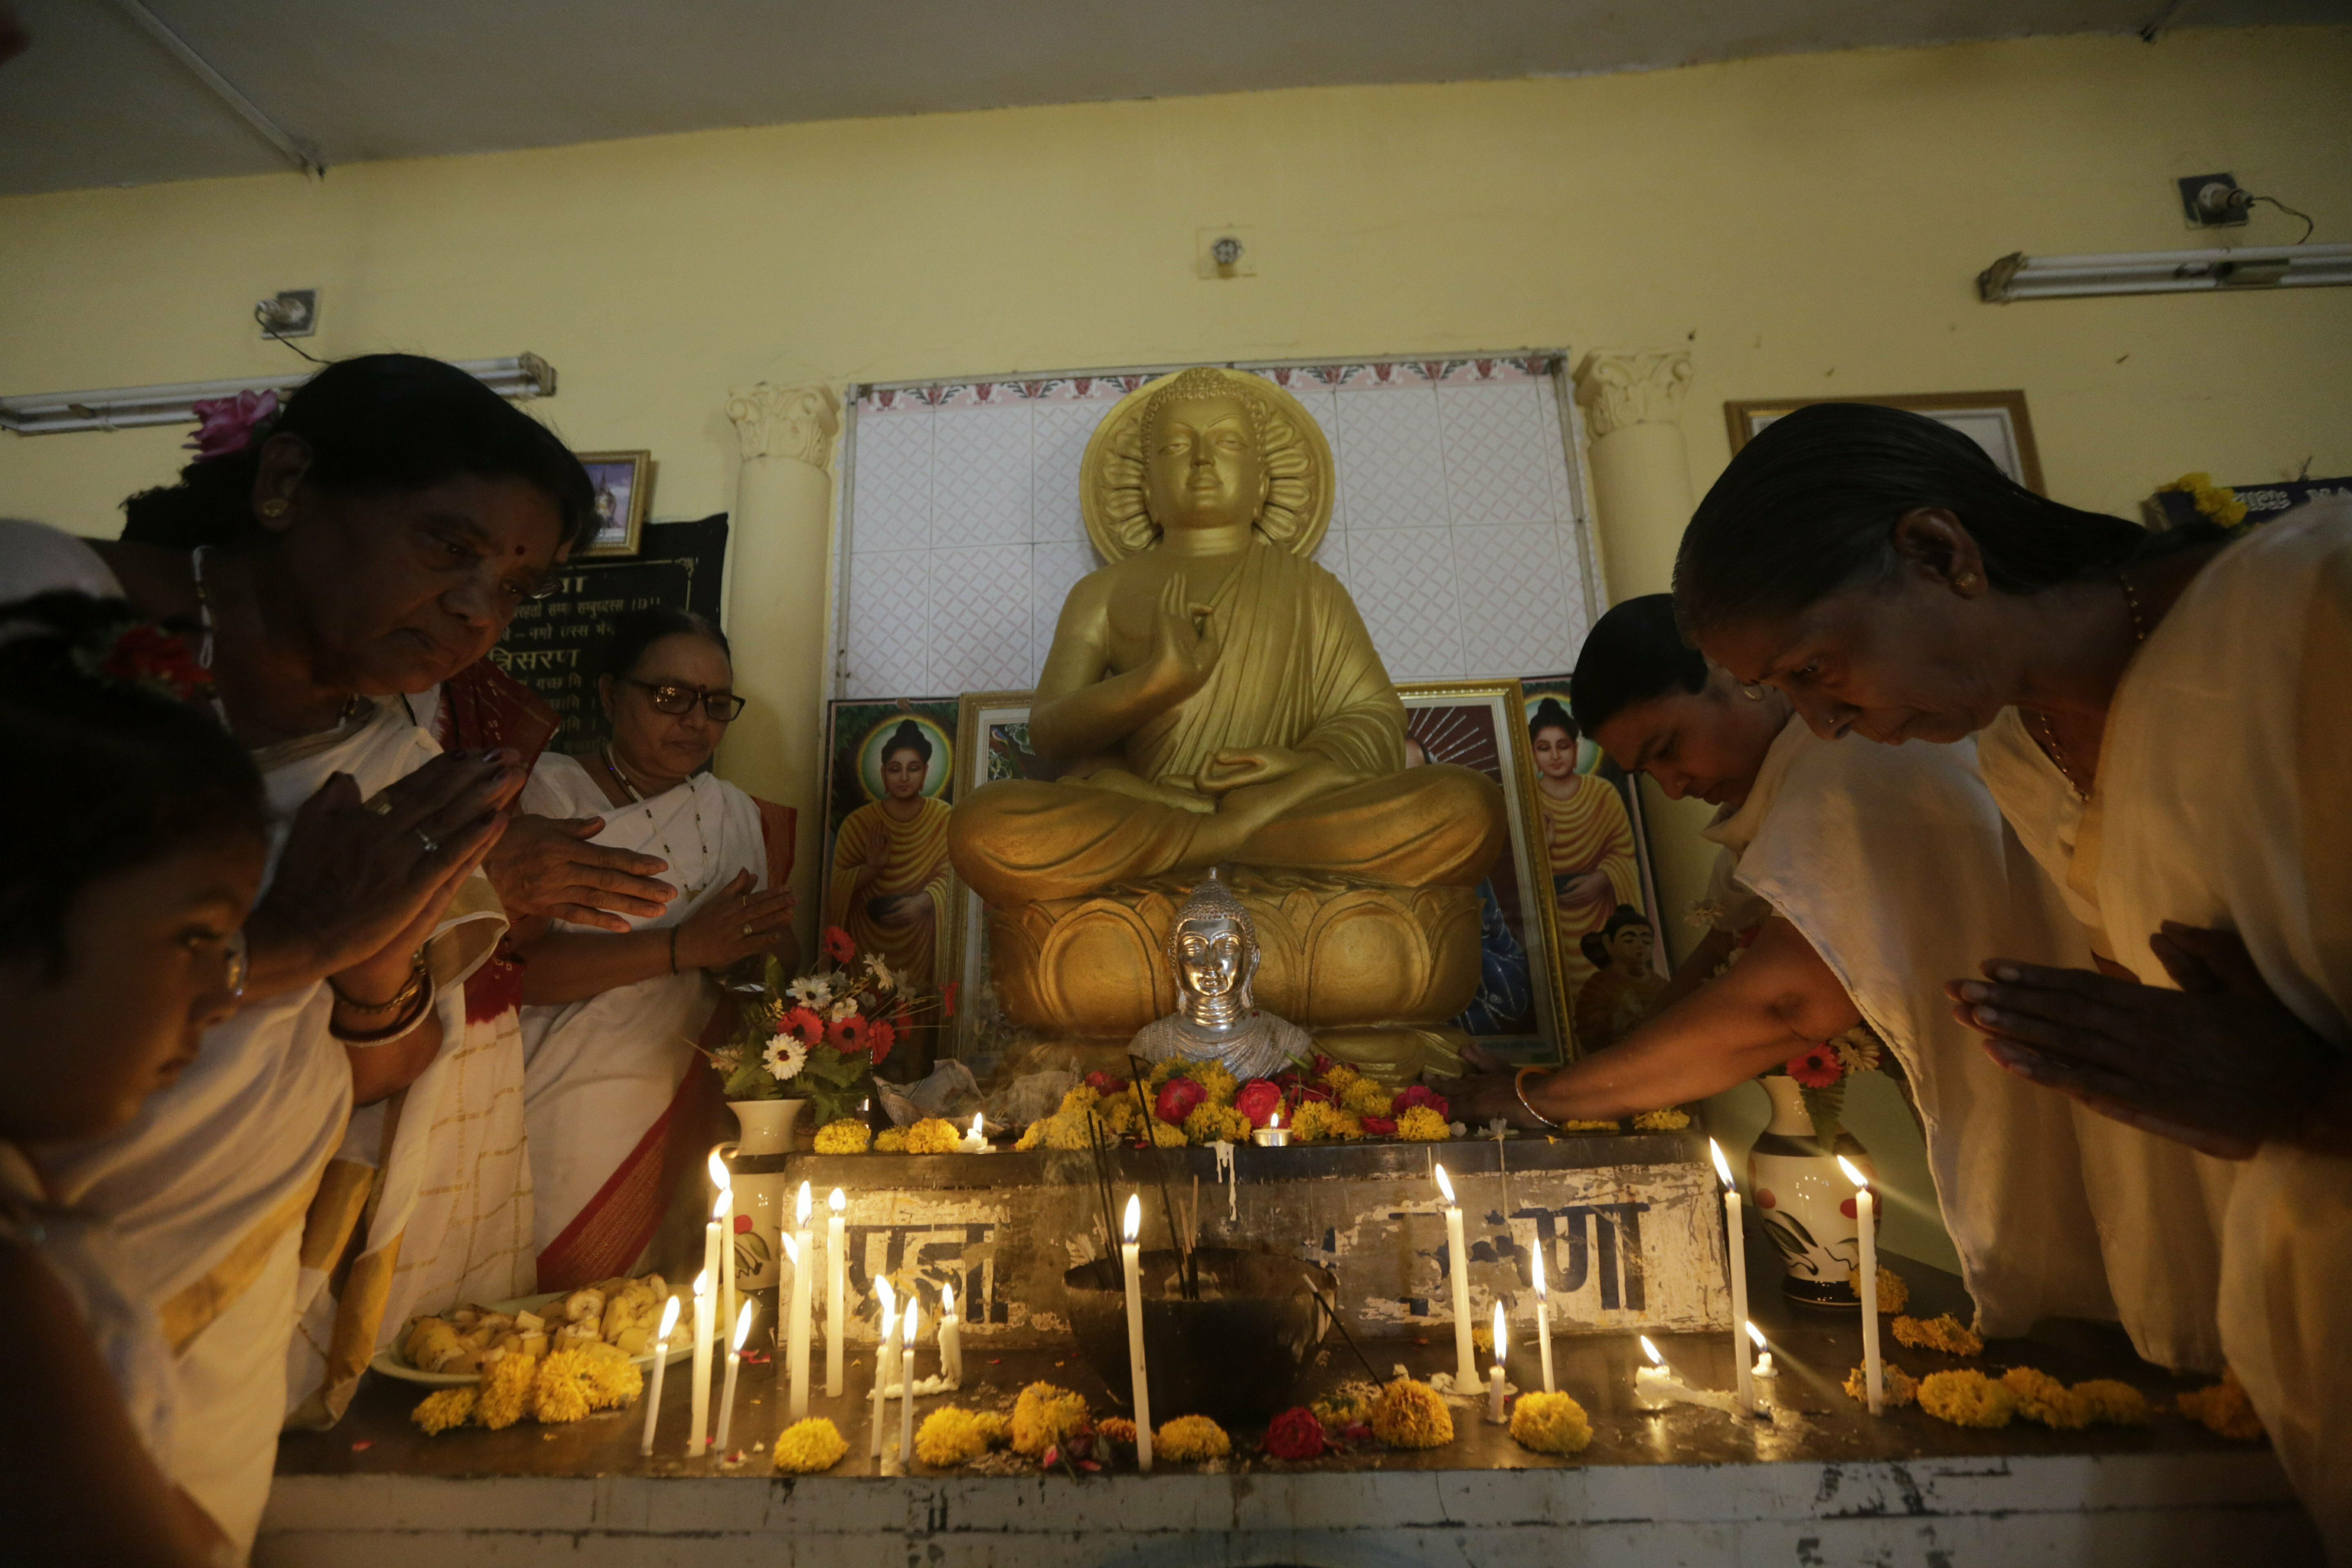 Indians offer prayers on Buddha Purnima festival in Ahmadabad, India, Saturday, May 18, 2019. The festival marks the birth, enlightenment and death of Buddha. (AP Photo/Ajit Solanki)